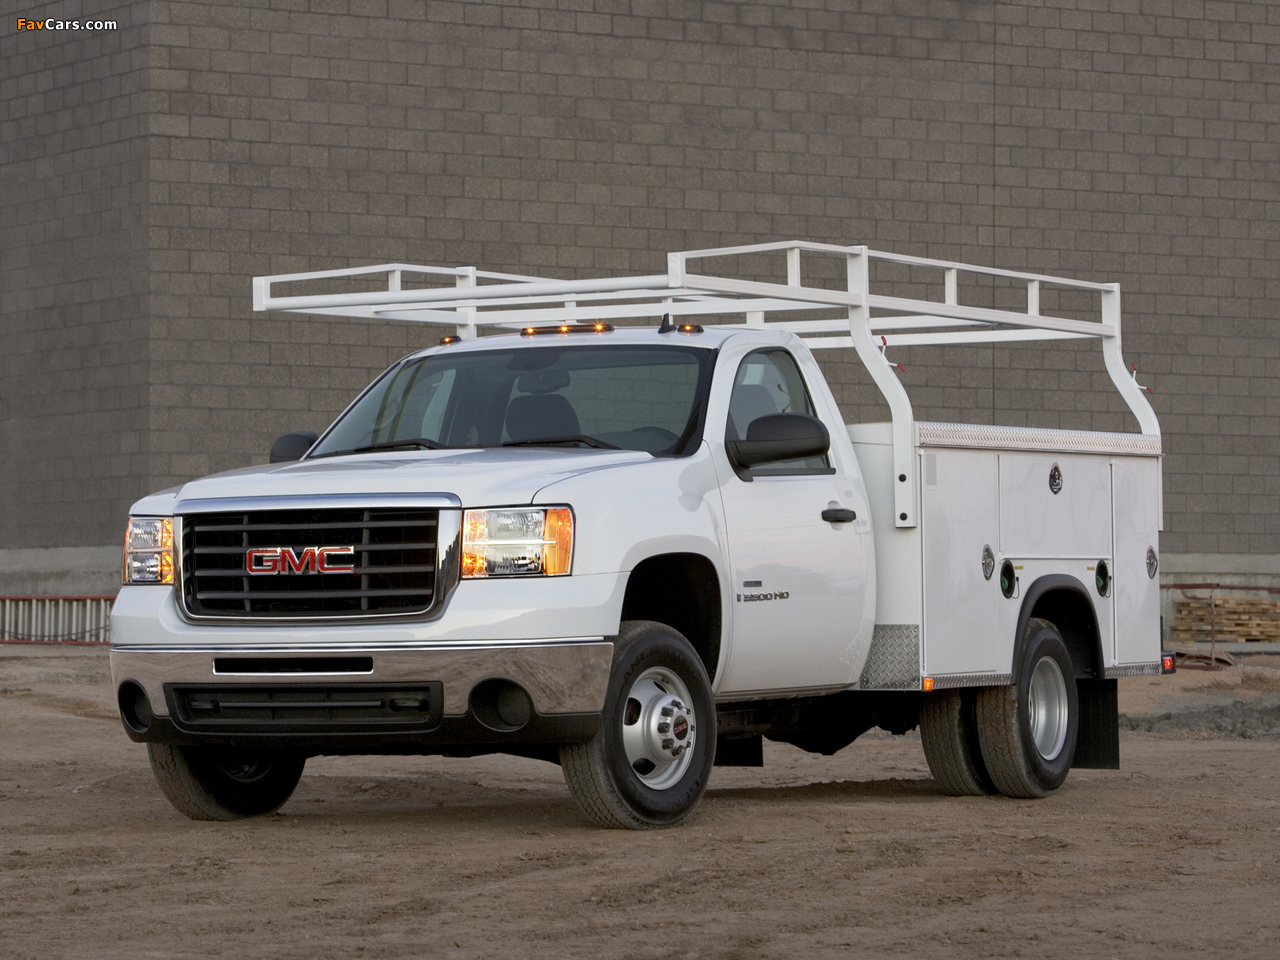 Pictures of GMC Sierra 3500 HD wService Utility Body 2008 (1280 x 960)